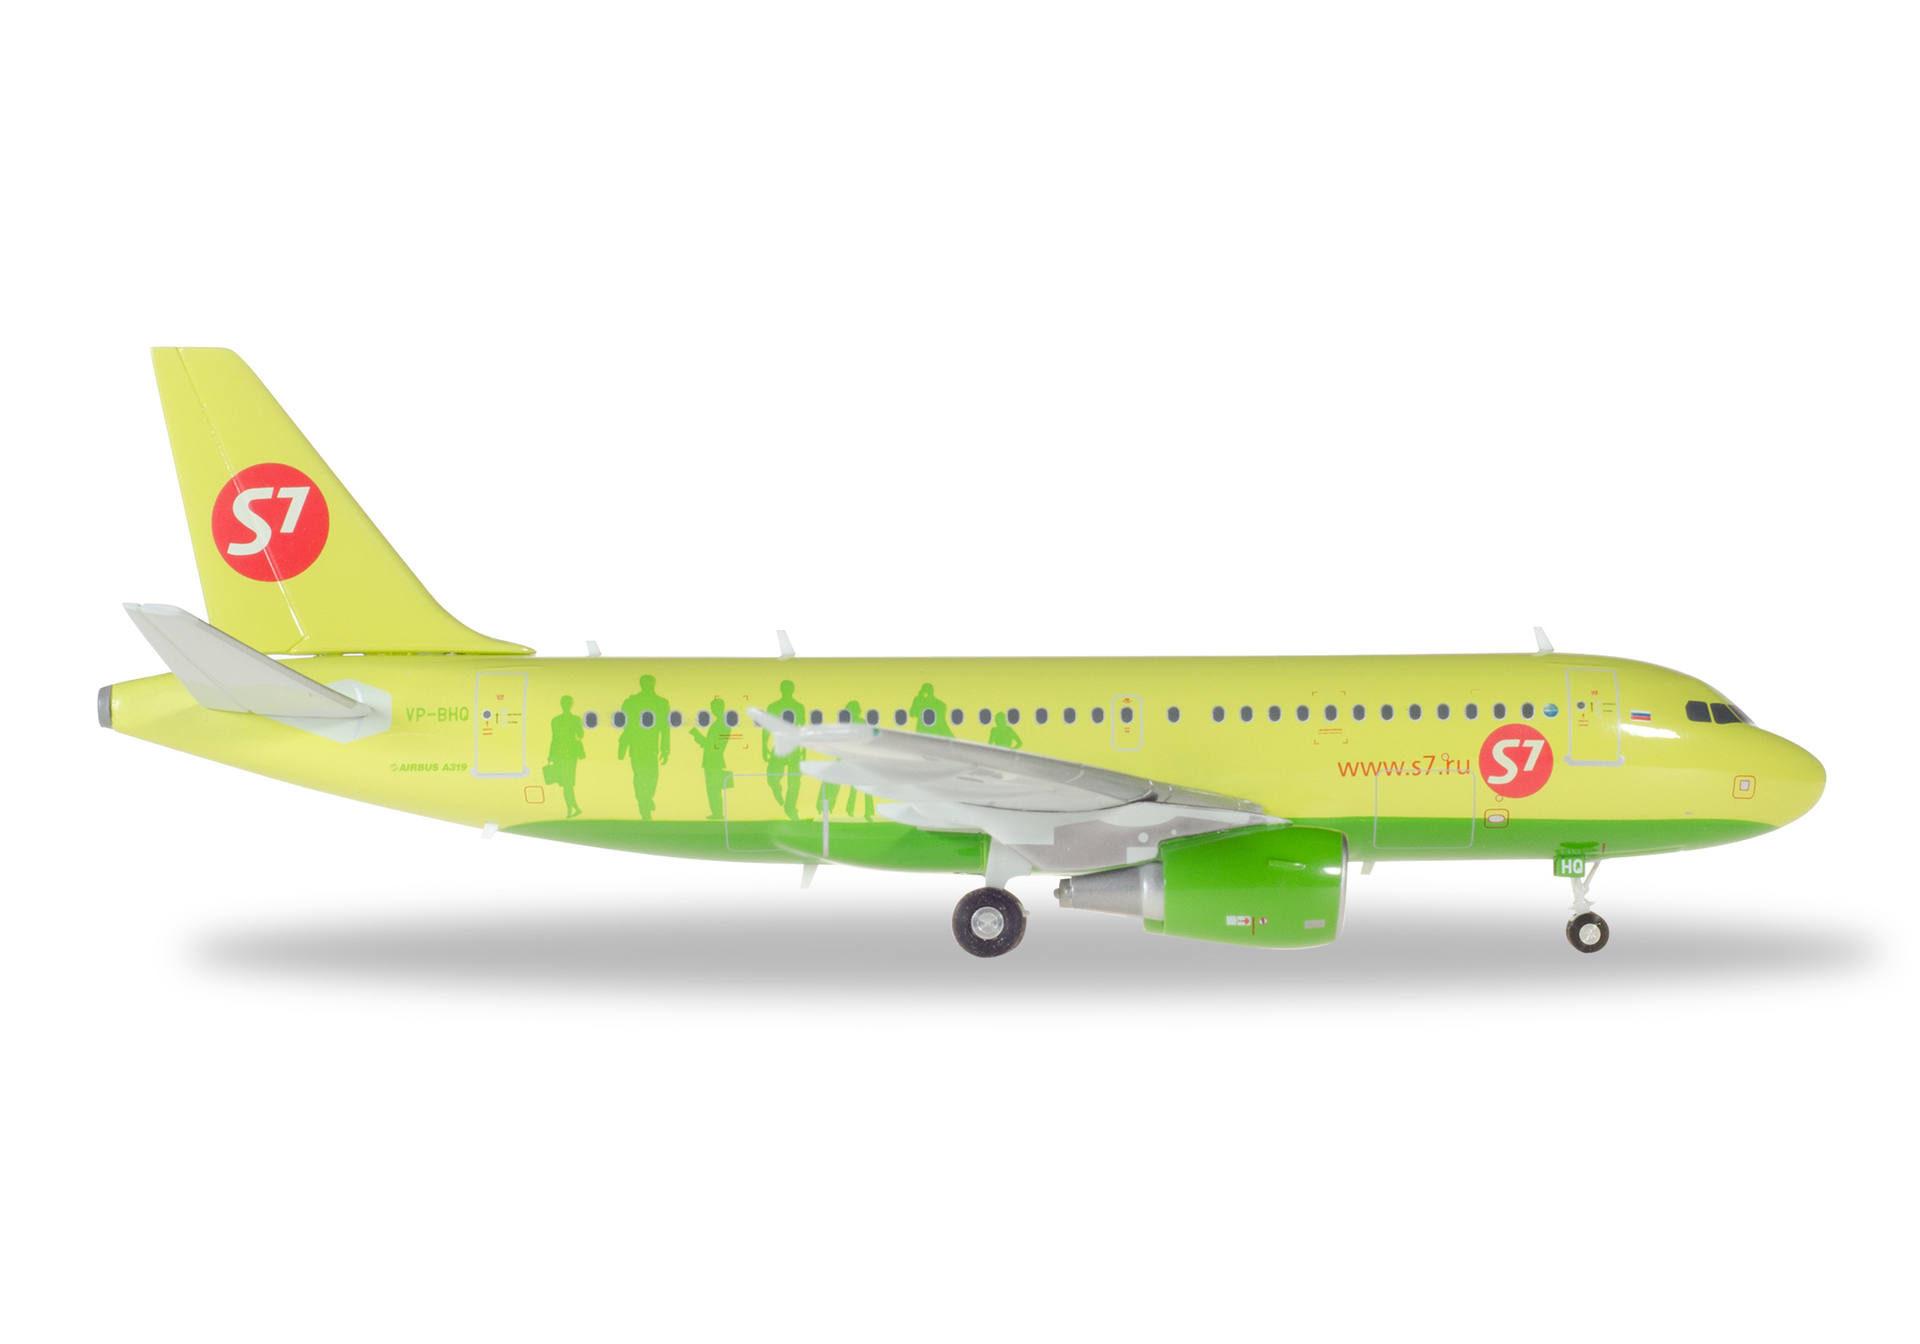 Herpa S7 Airlines Airbus A319 - VP-BHQ 559072